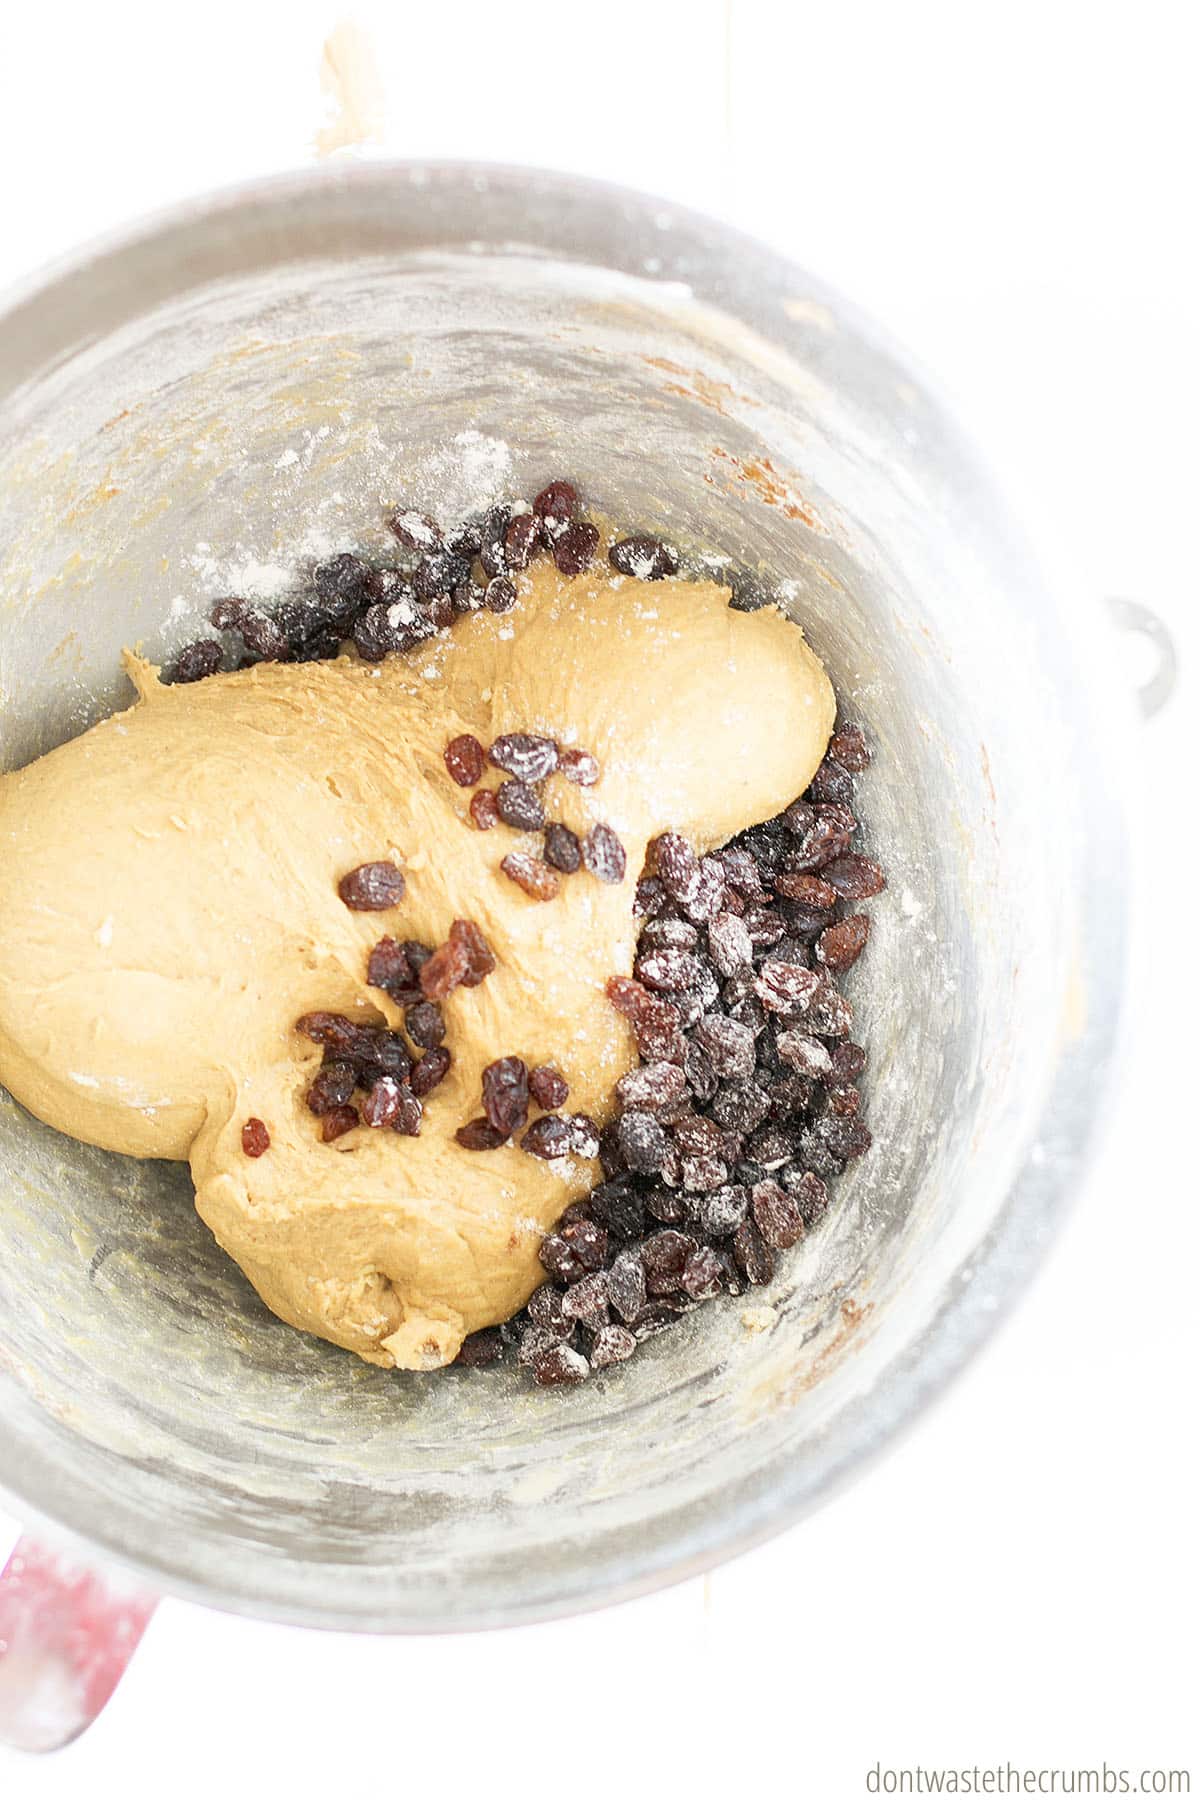 Dough and raisins in a mixing bowl